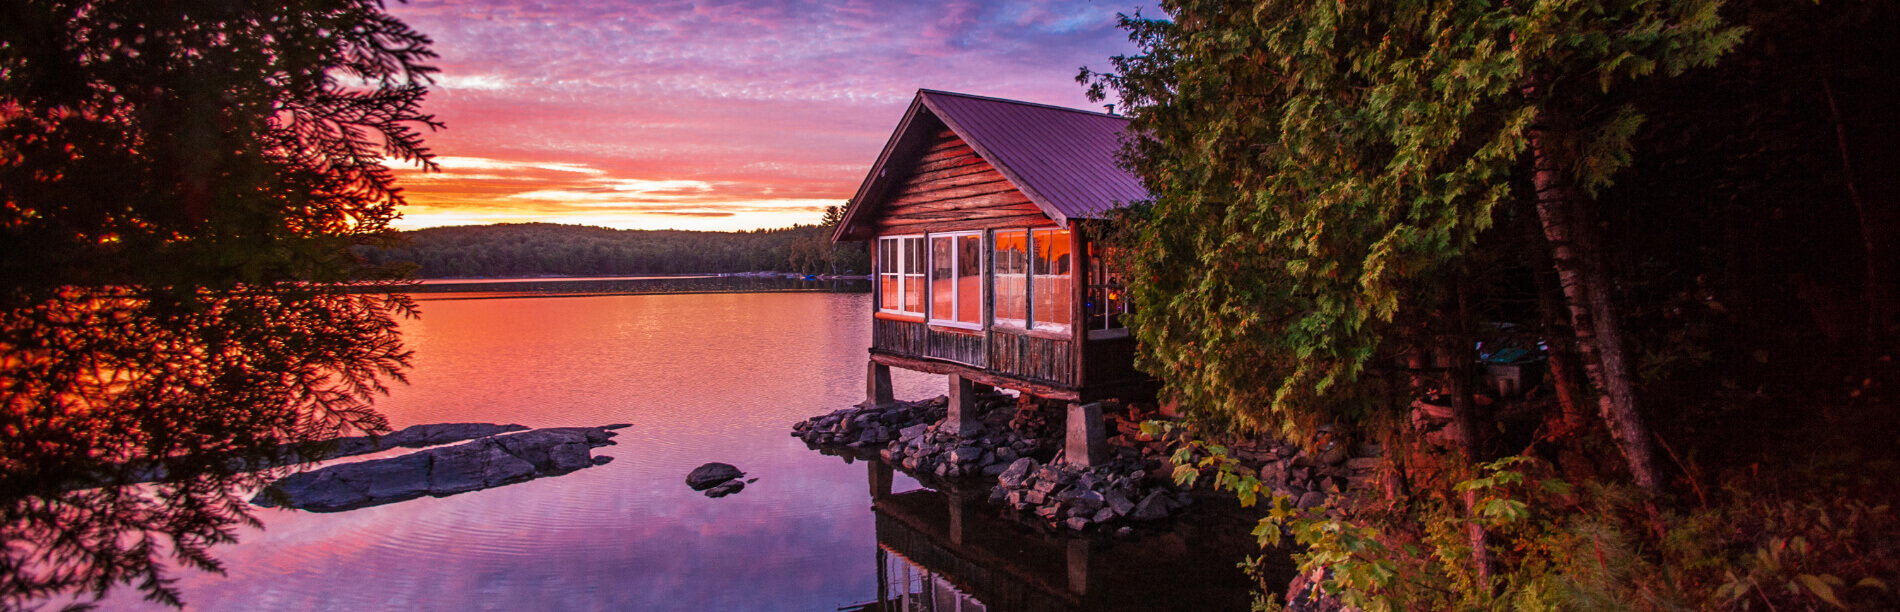 A sunset on a lake with a cottage.